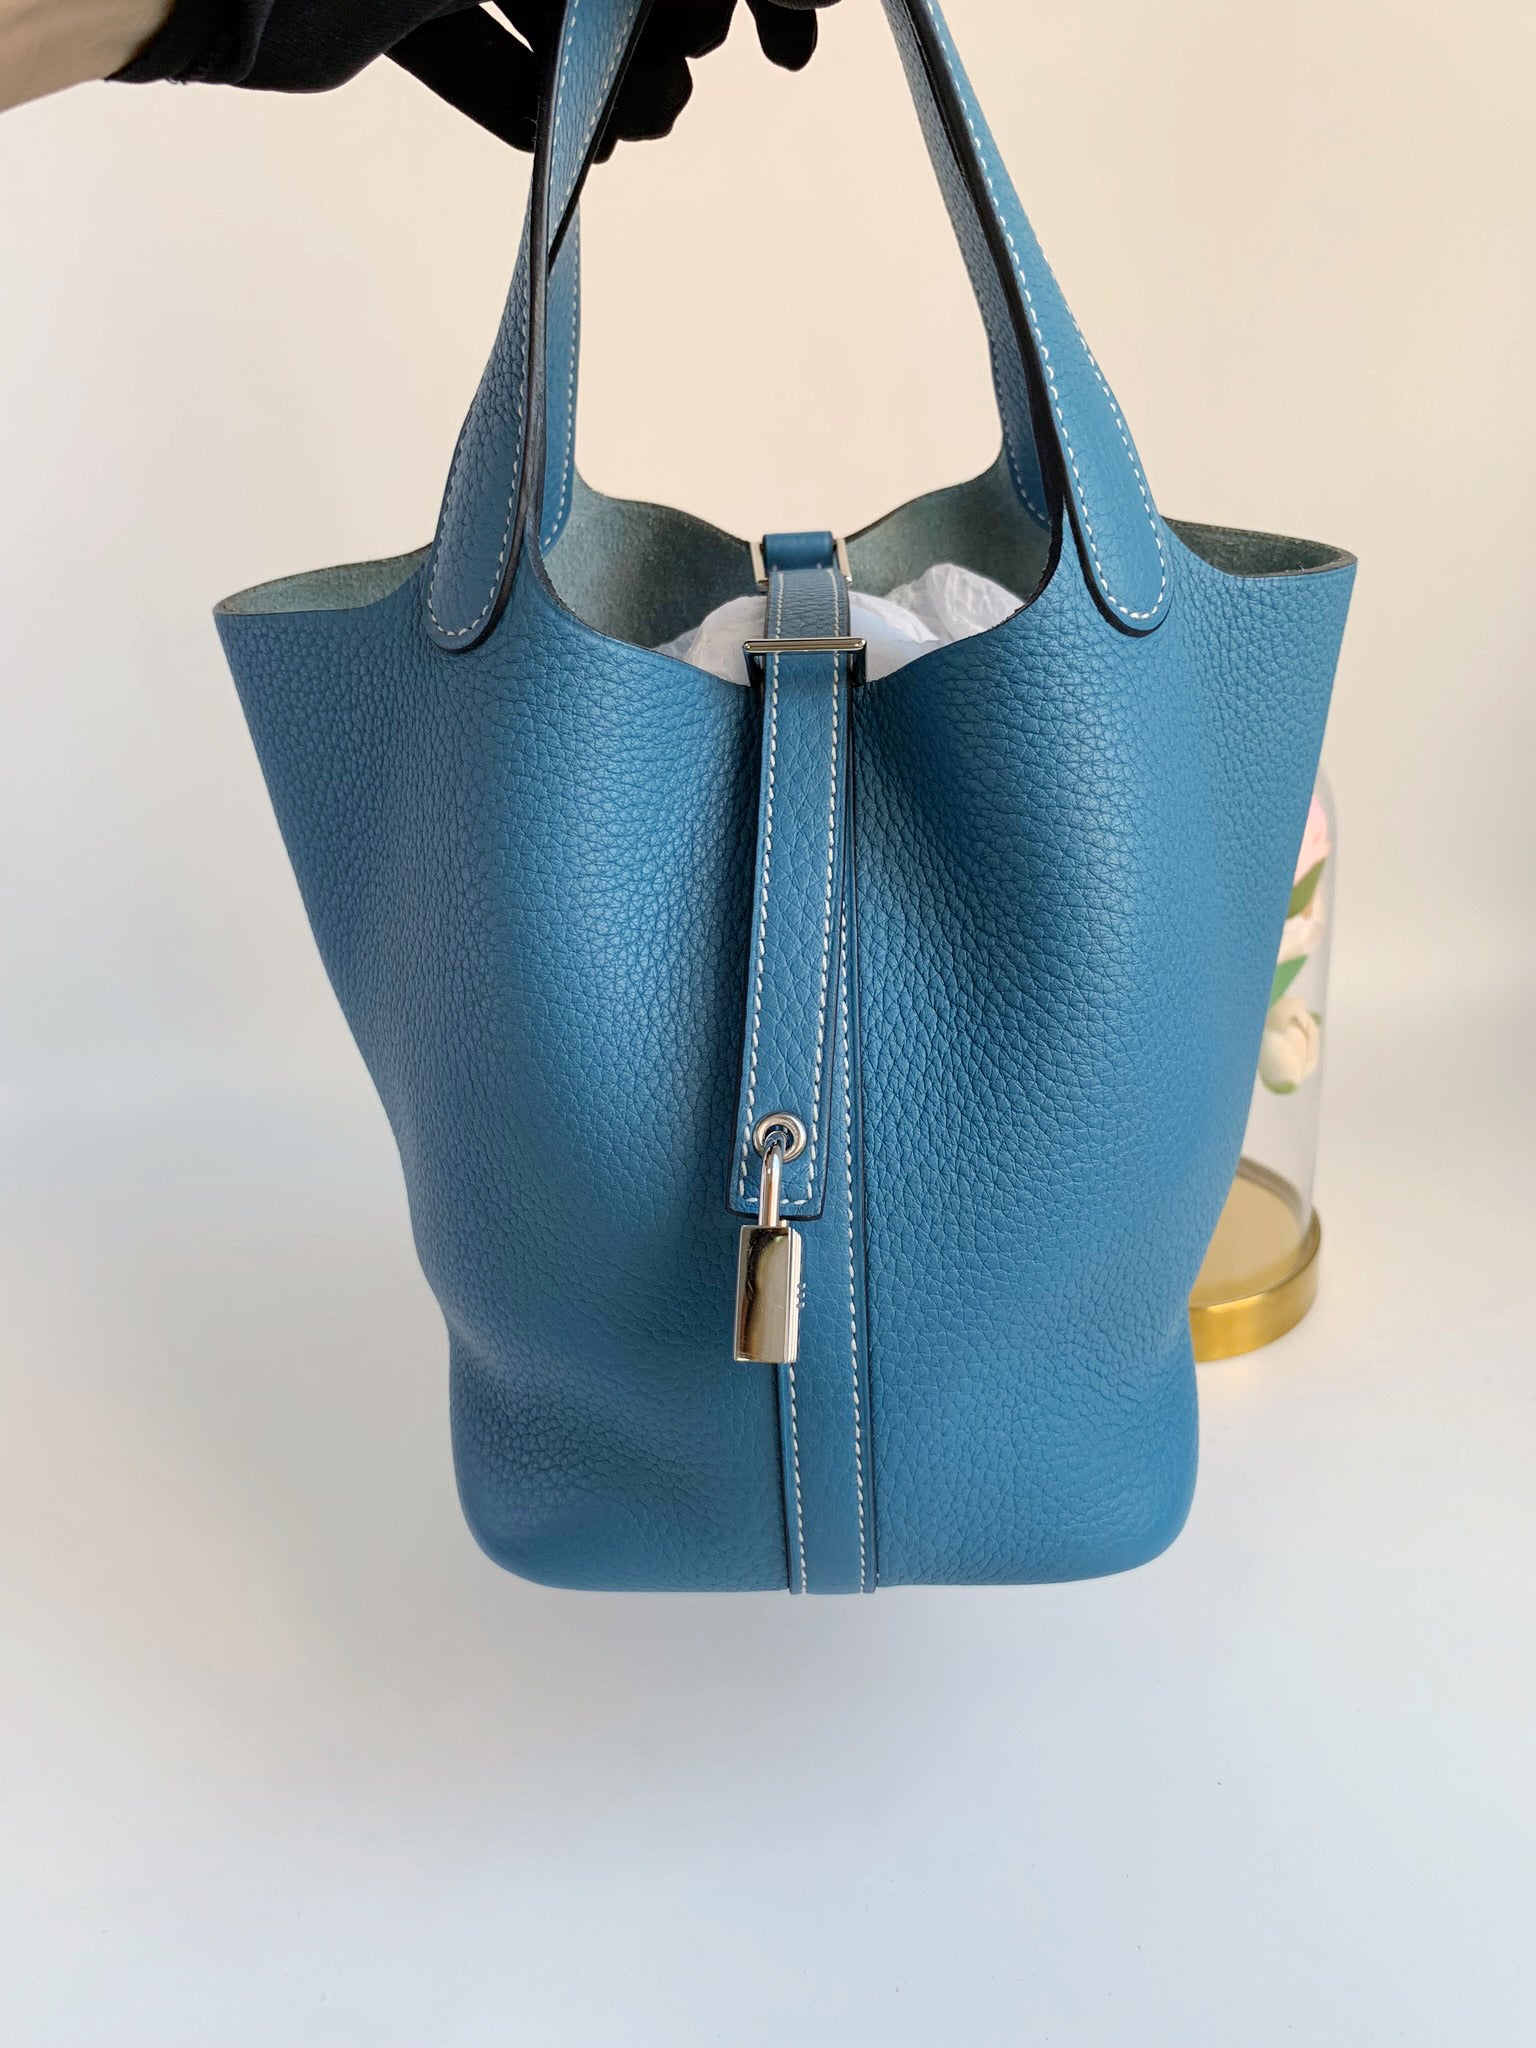 Hermes PHW Picotin PM Tote Bag Taurillon Clemence Leather Bleu Tempete Blue